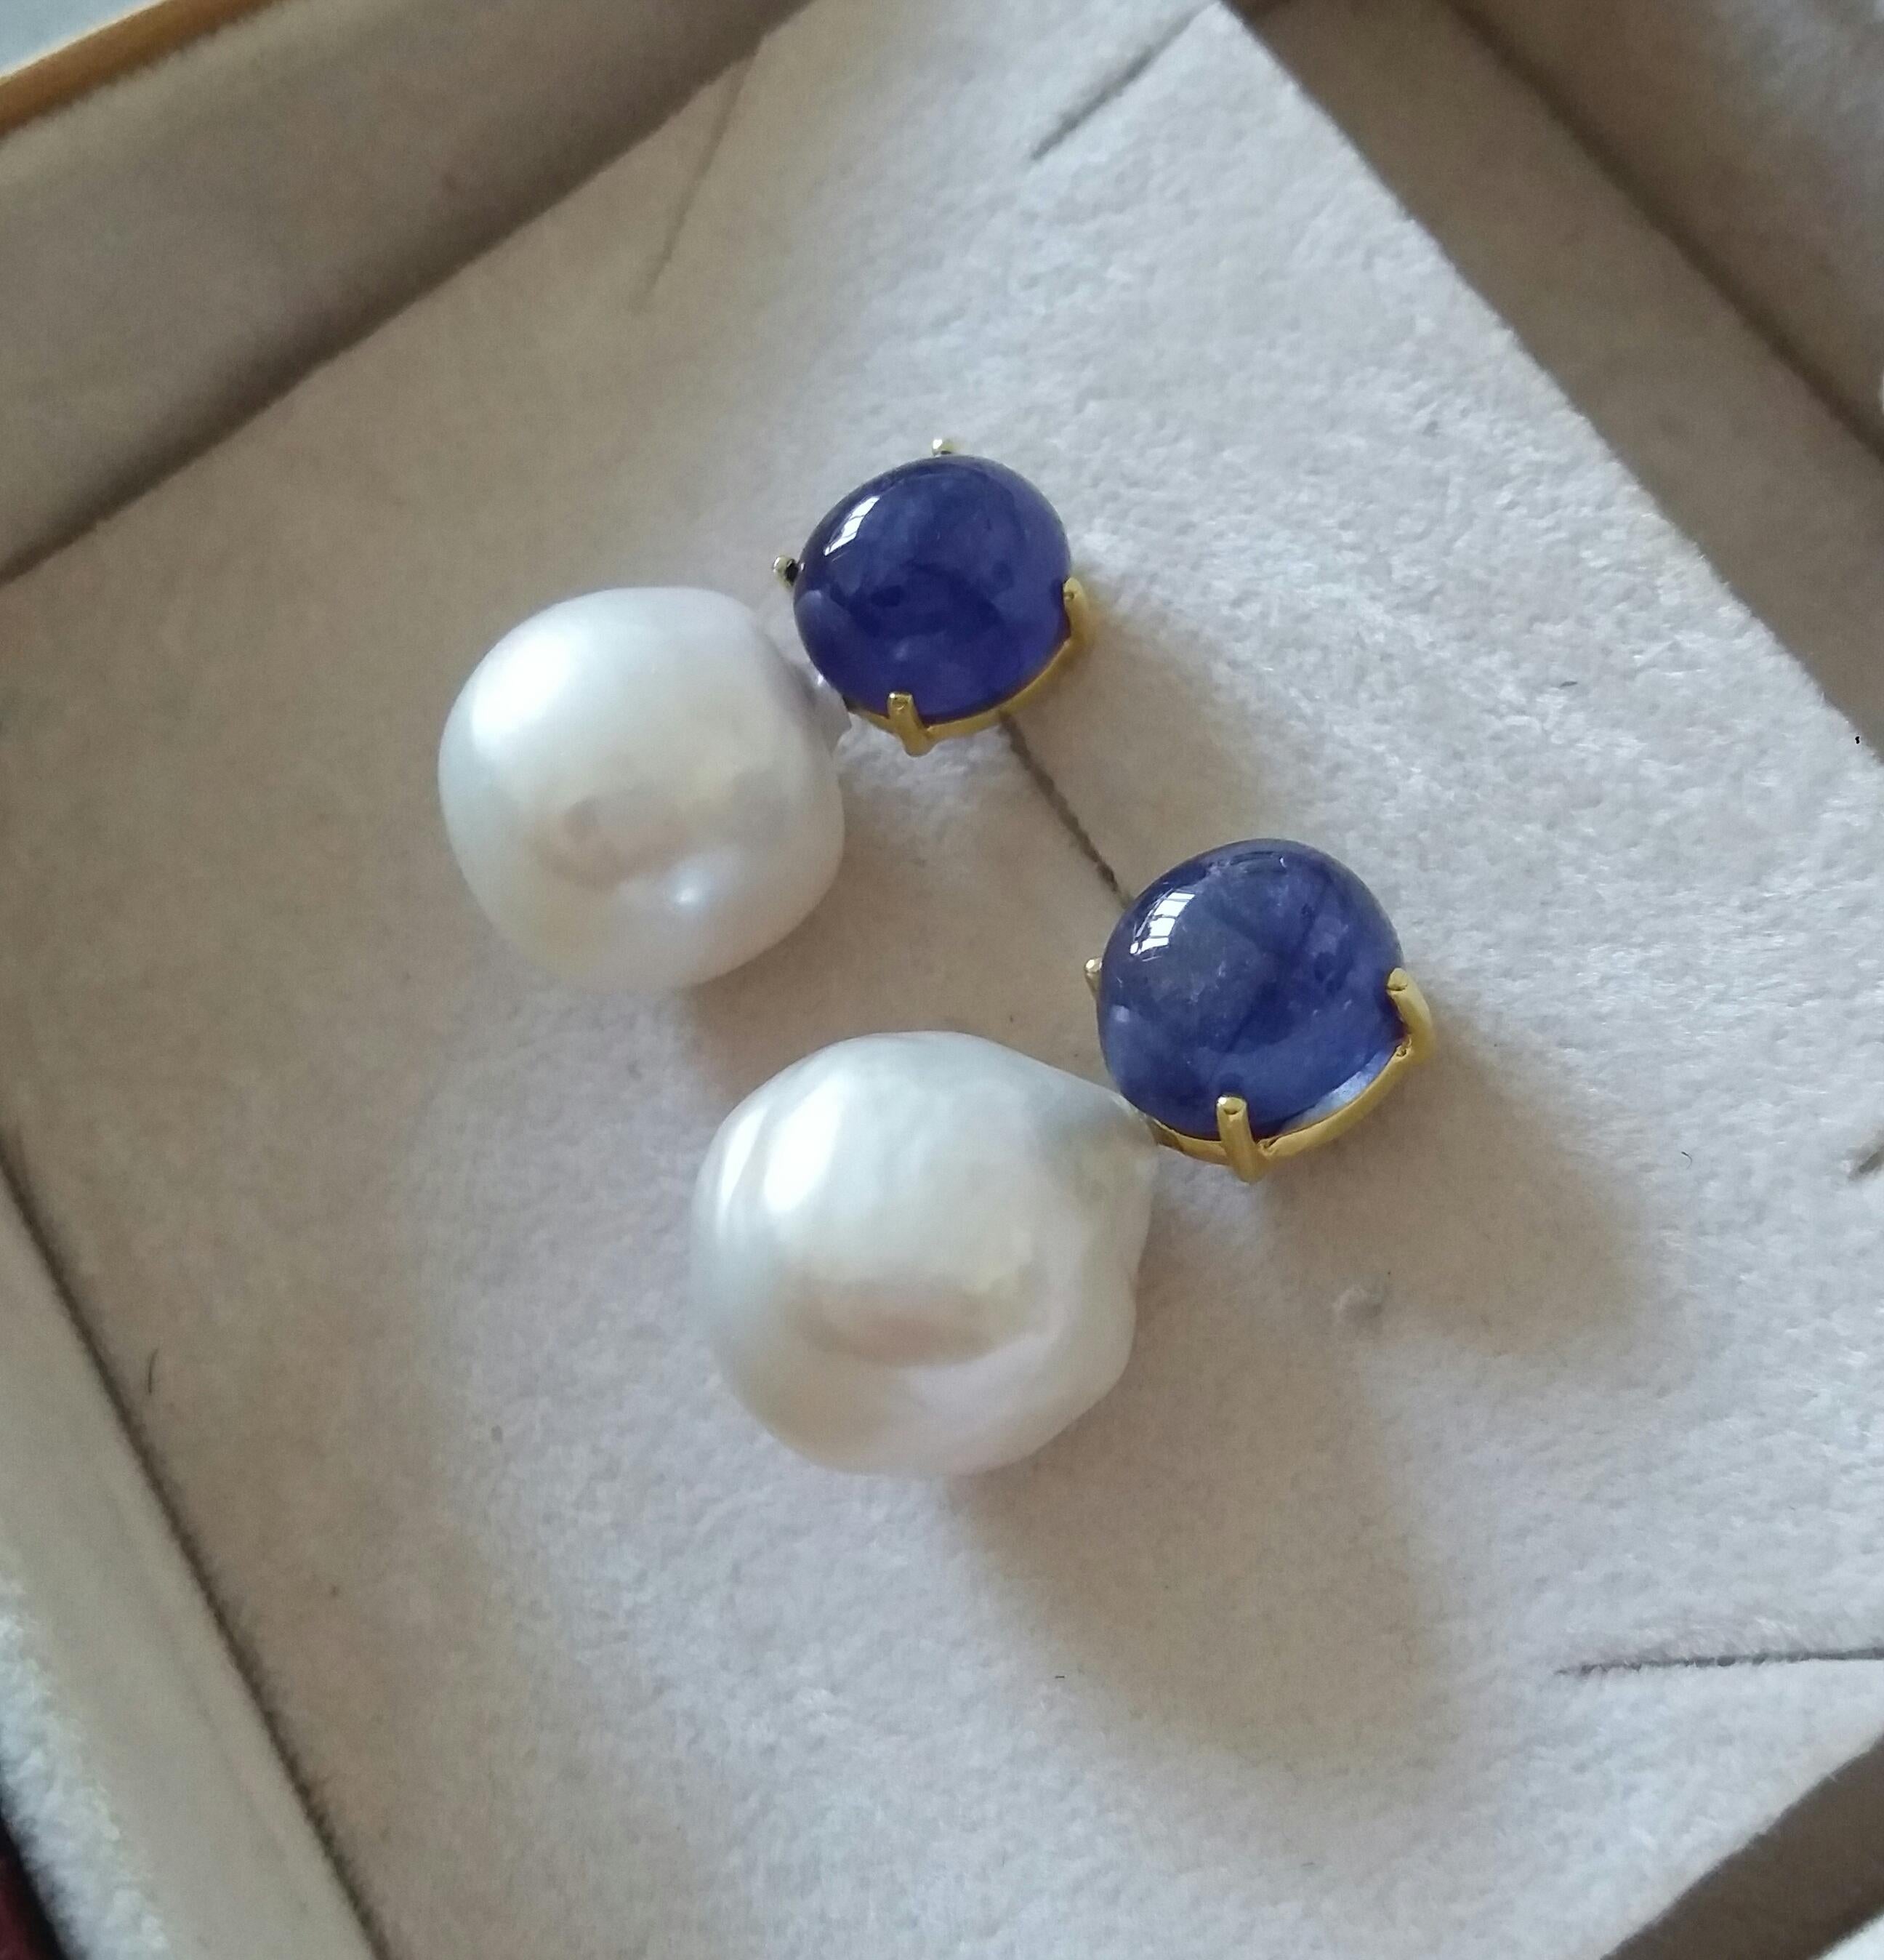 Big Size White Baroque Pearls Oval Blue Sapphires Cabochons Yellow Gold Earrings For Sale 2